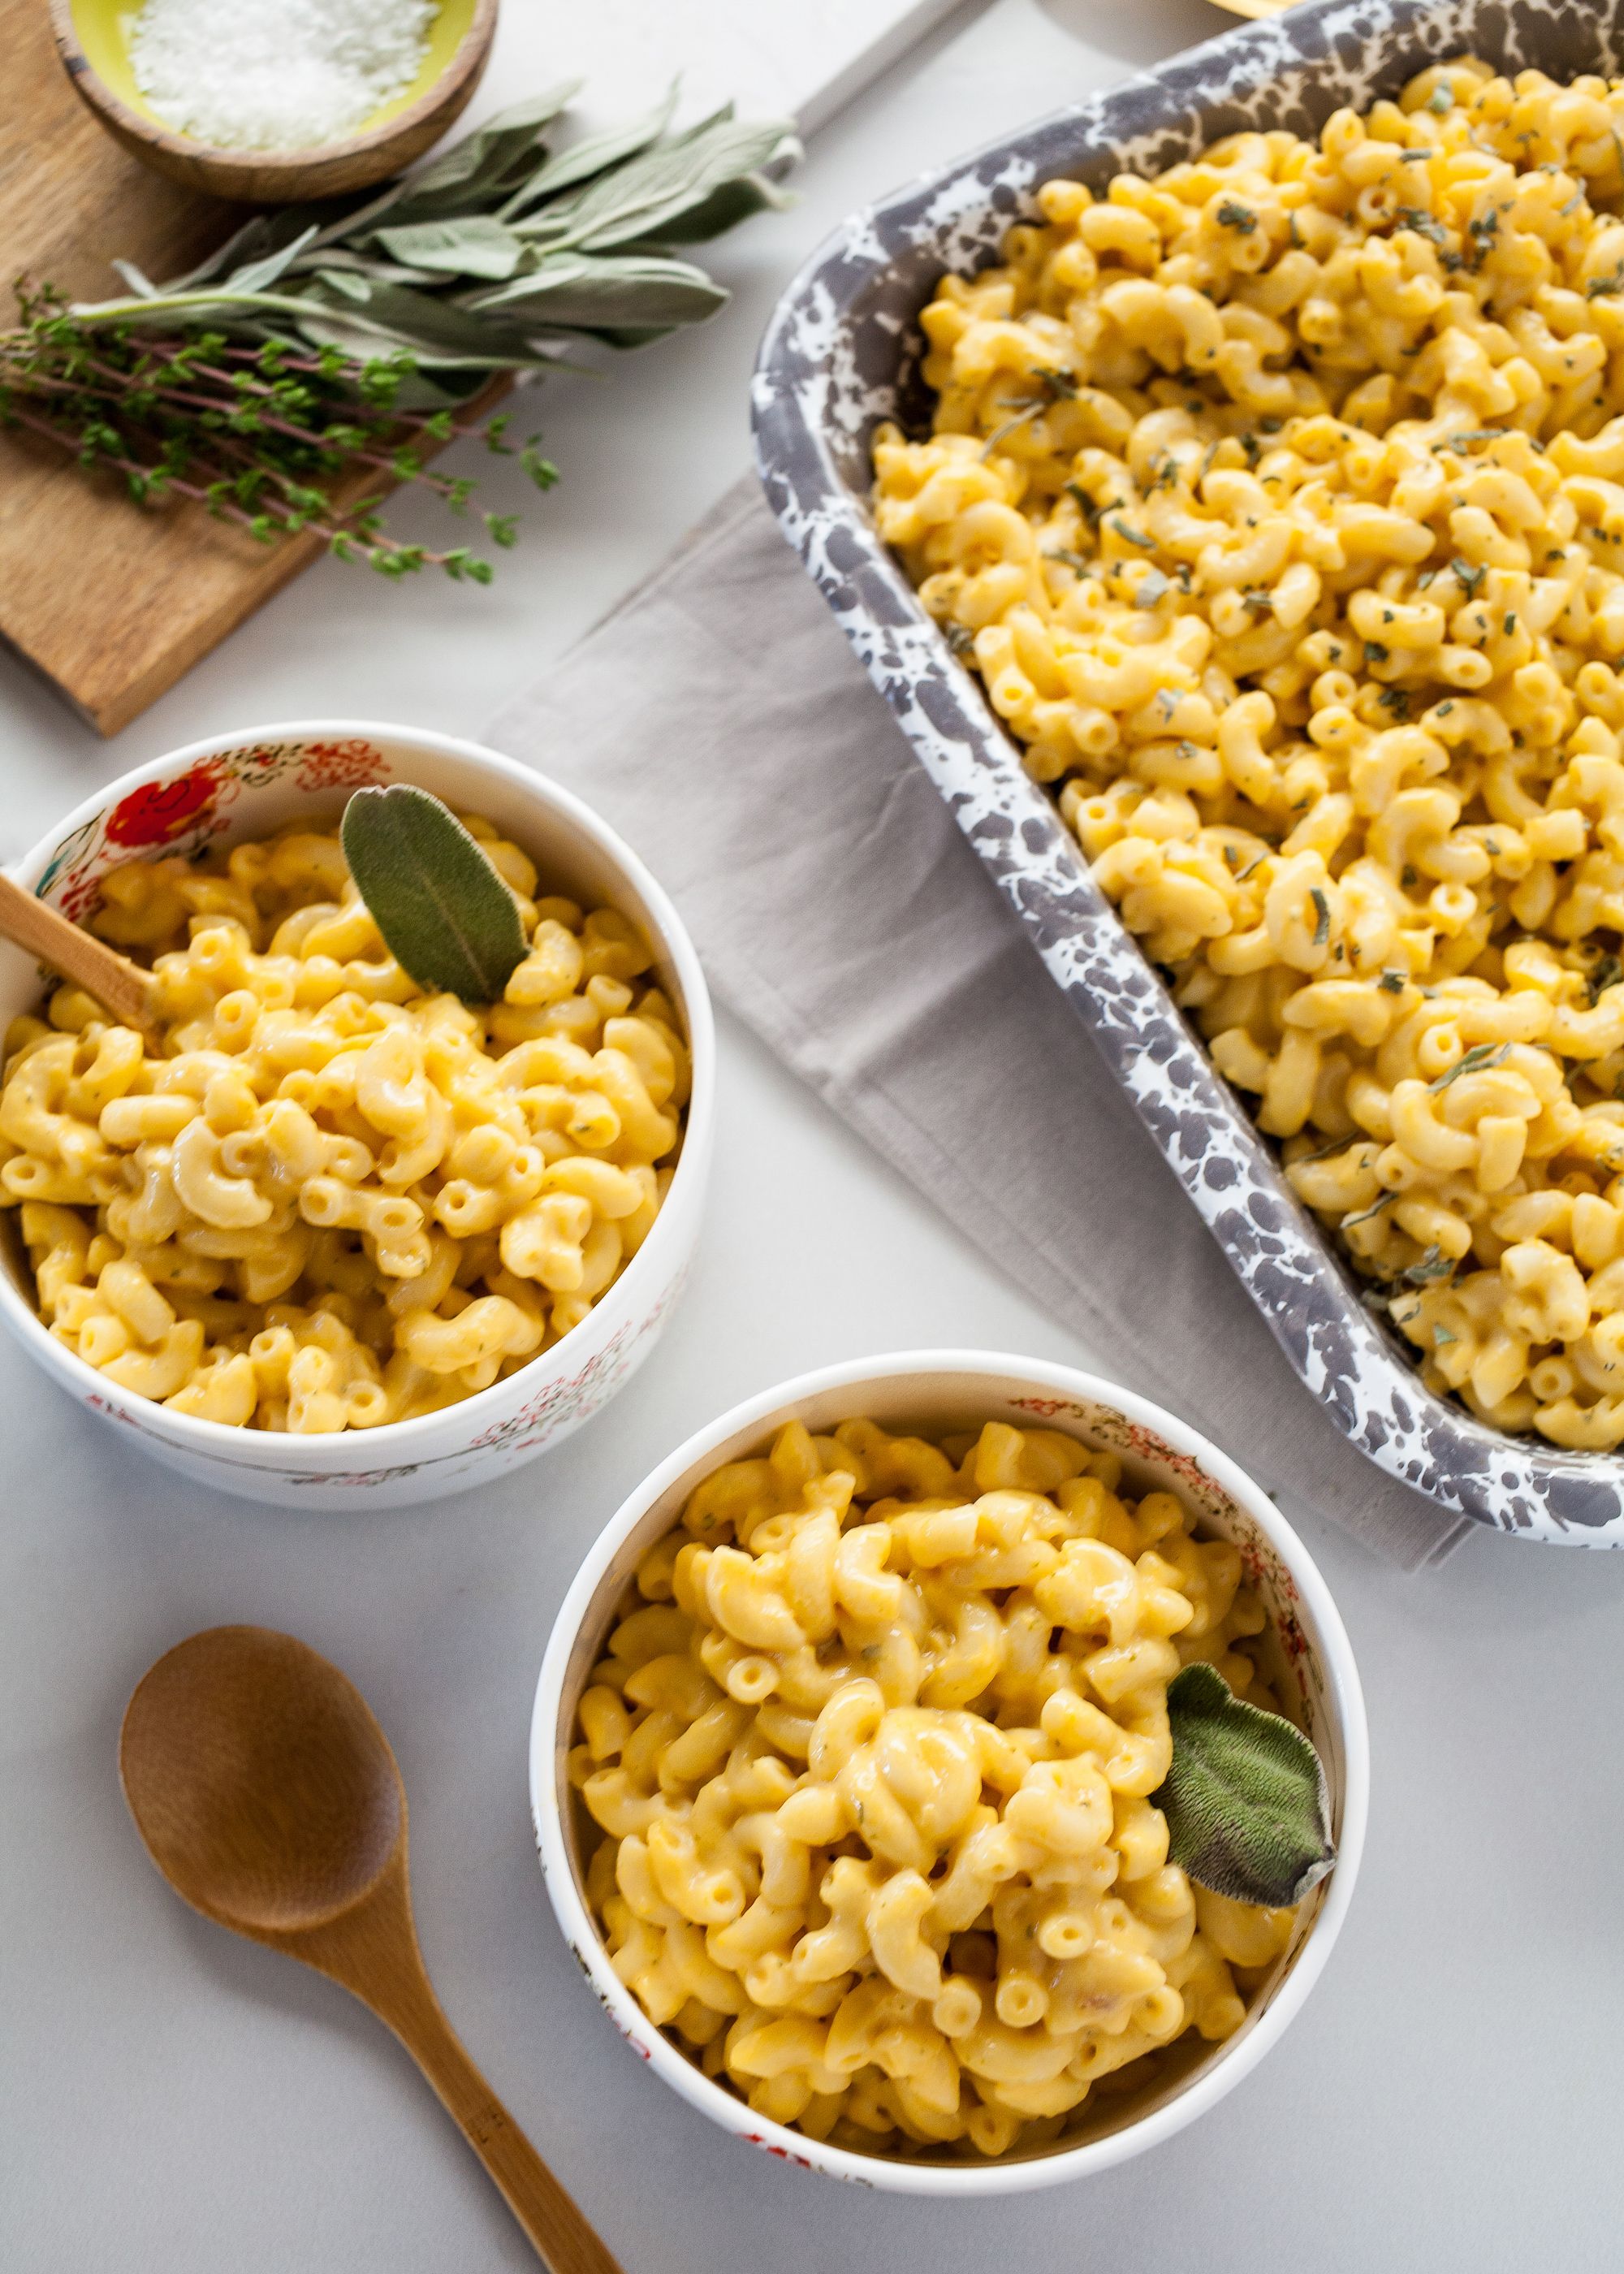 pioneer woman mac and cheese with squash